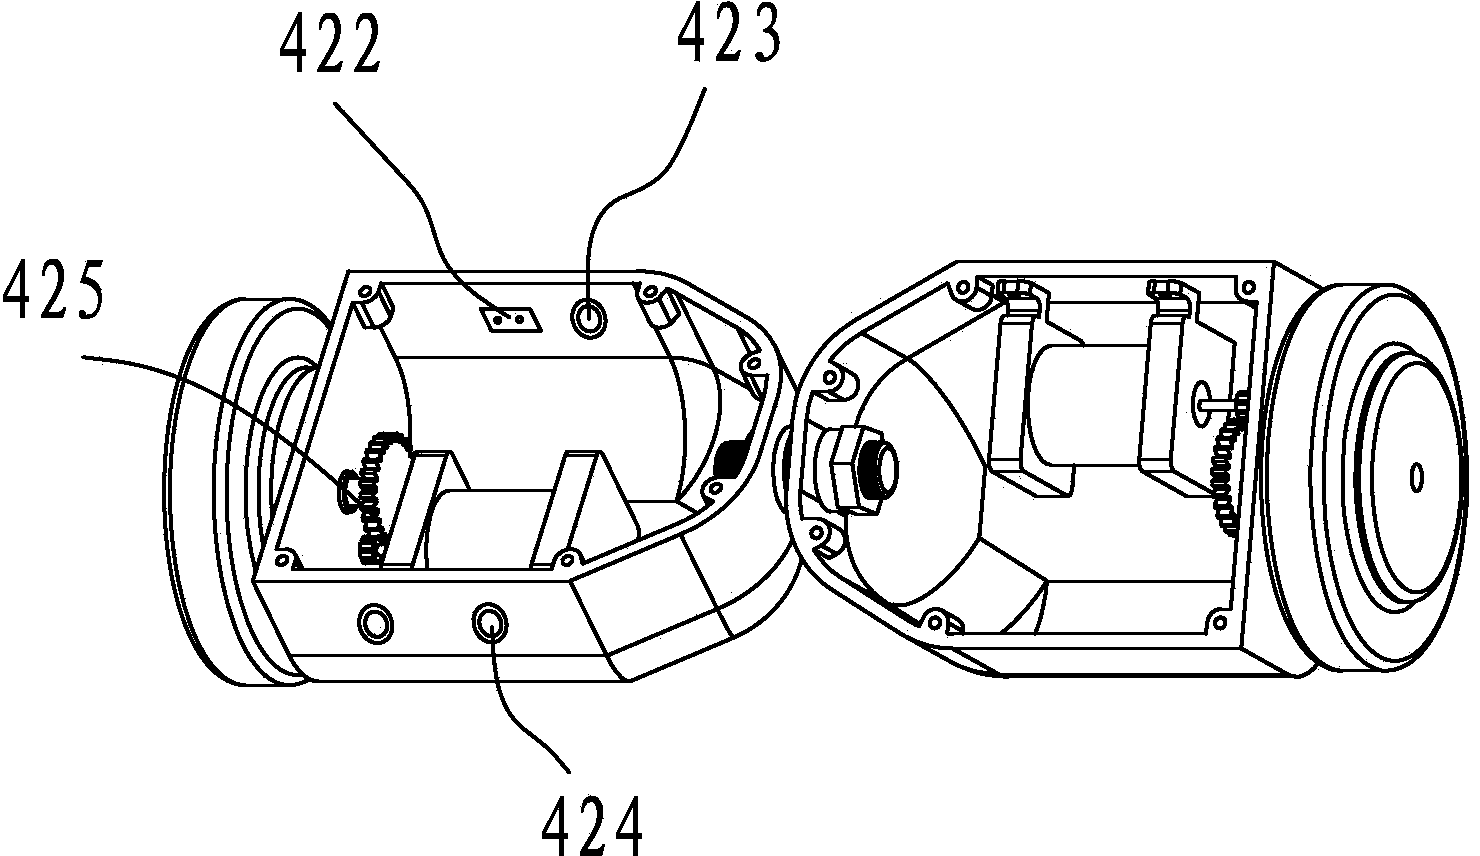 Steering control method for self-balancing two-wheeled vehicle